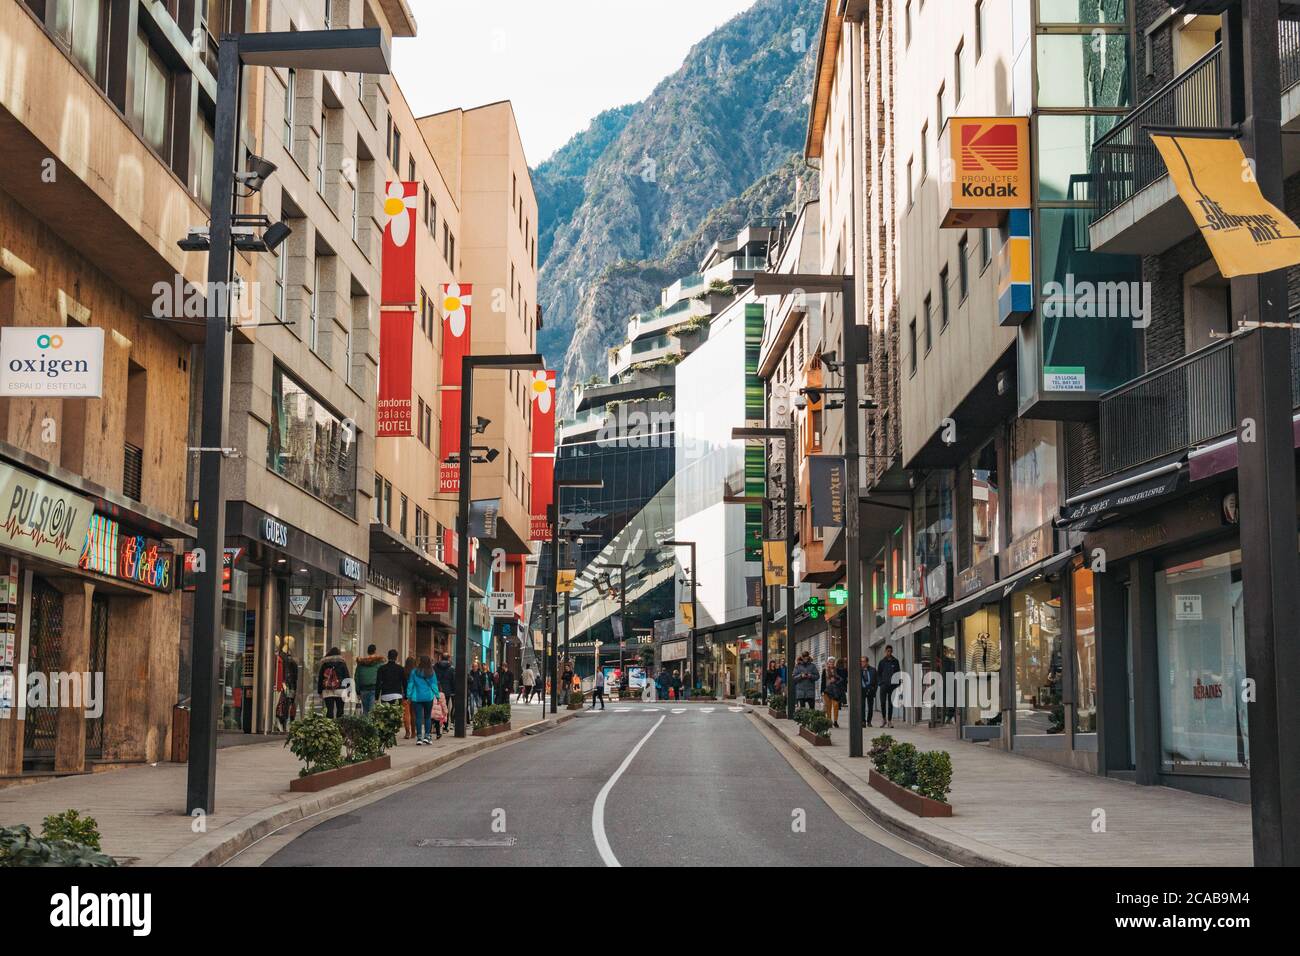 Retail district on Av. Meritxell in Andorra la Vella, capital city of Andorra. A popular destination to pick up duty free goods in Europe Stock Photo